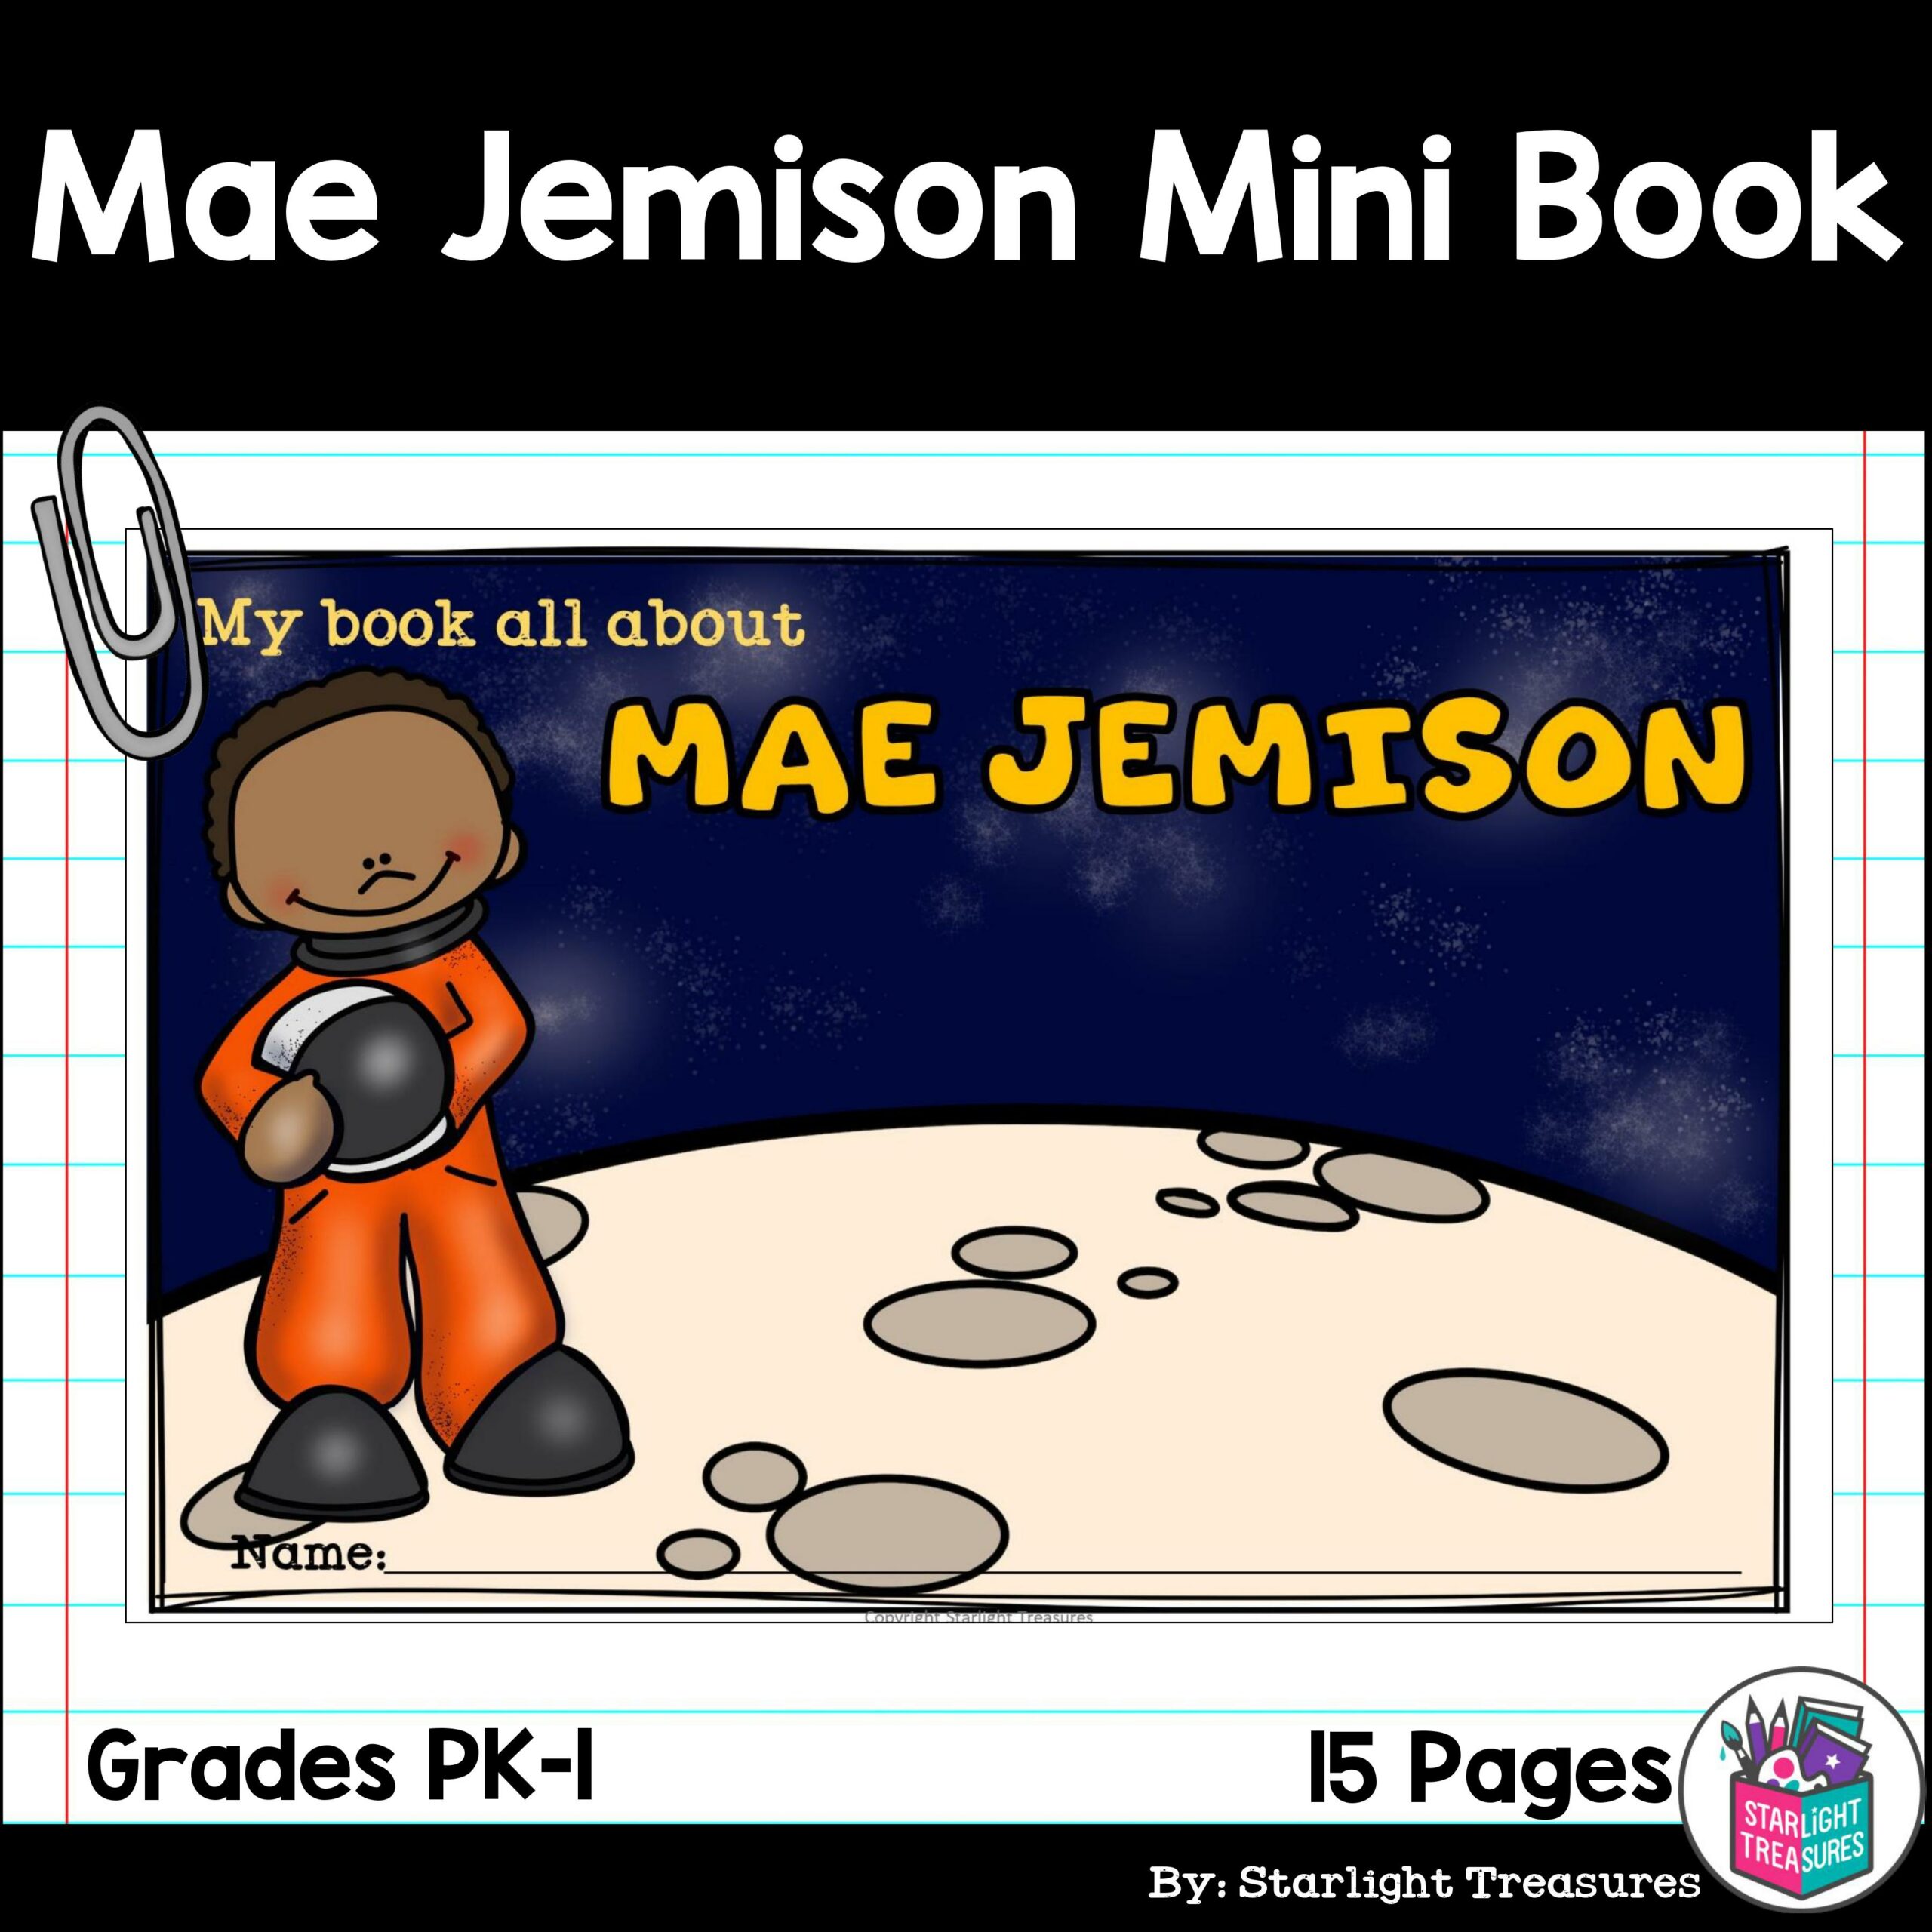 Mae jemison mini book for early readers black history month made by teachers